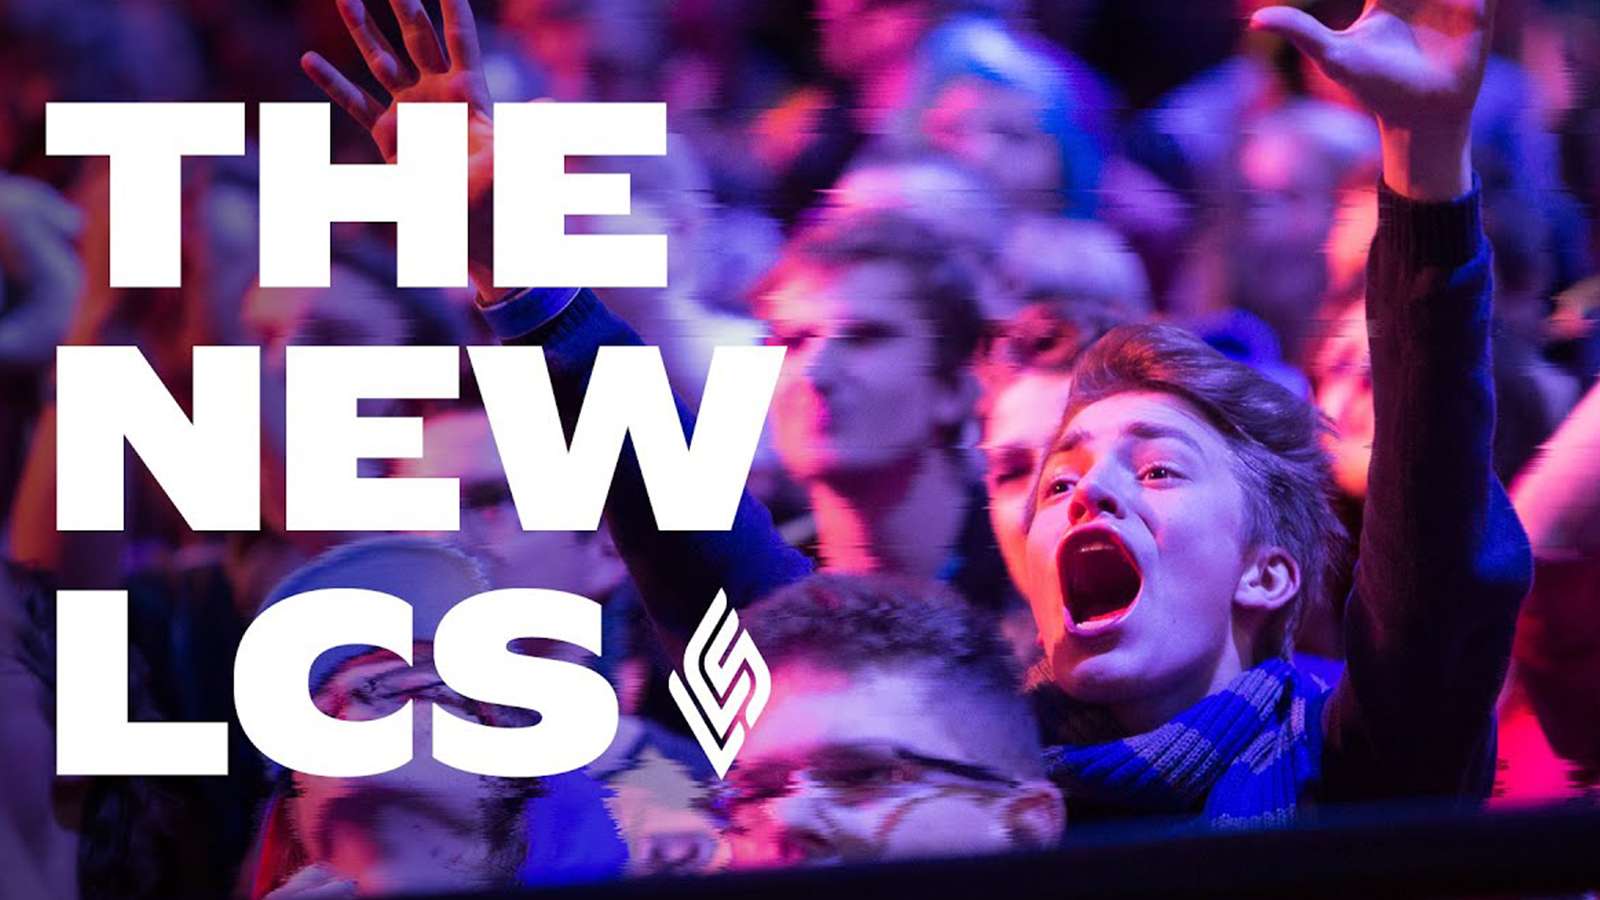 Riot Games unveils new LCS rebrand for 2021 season.